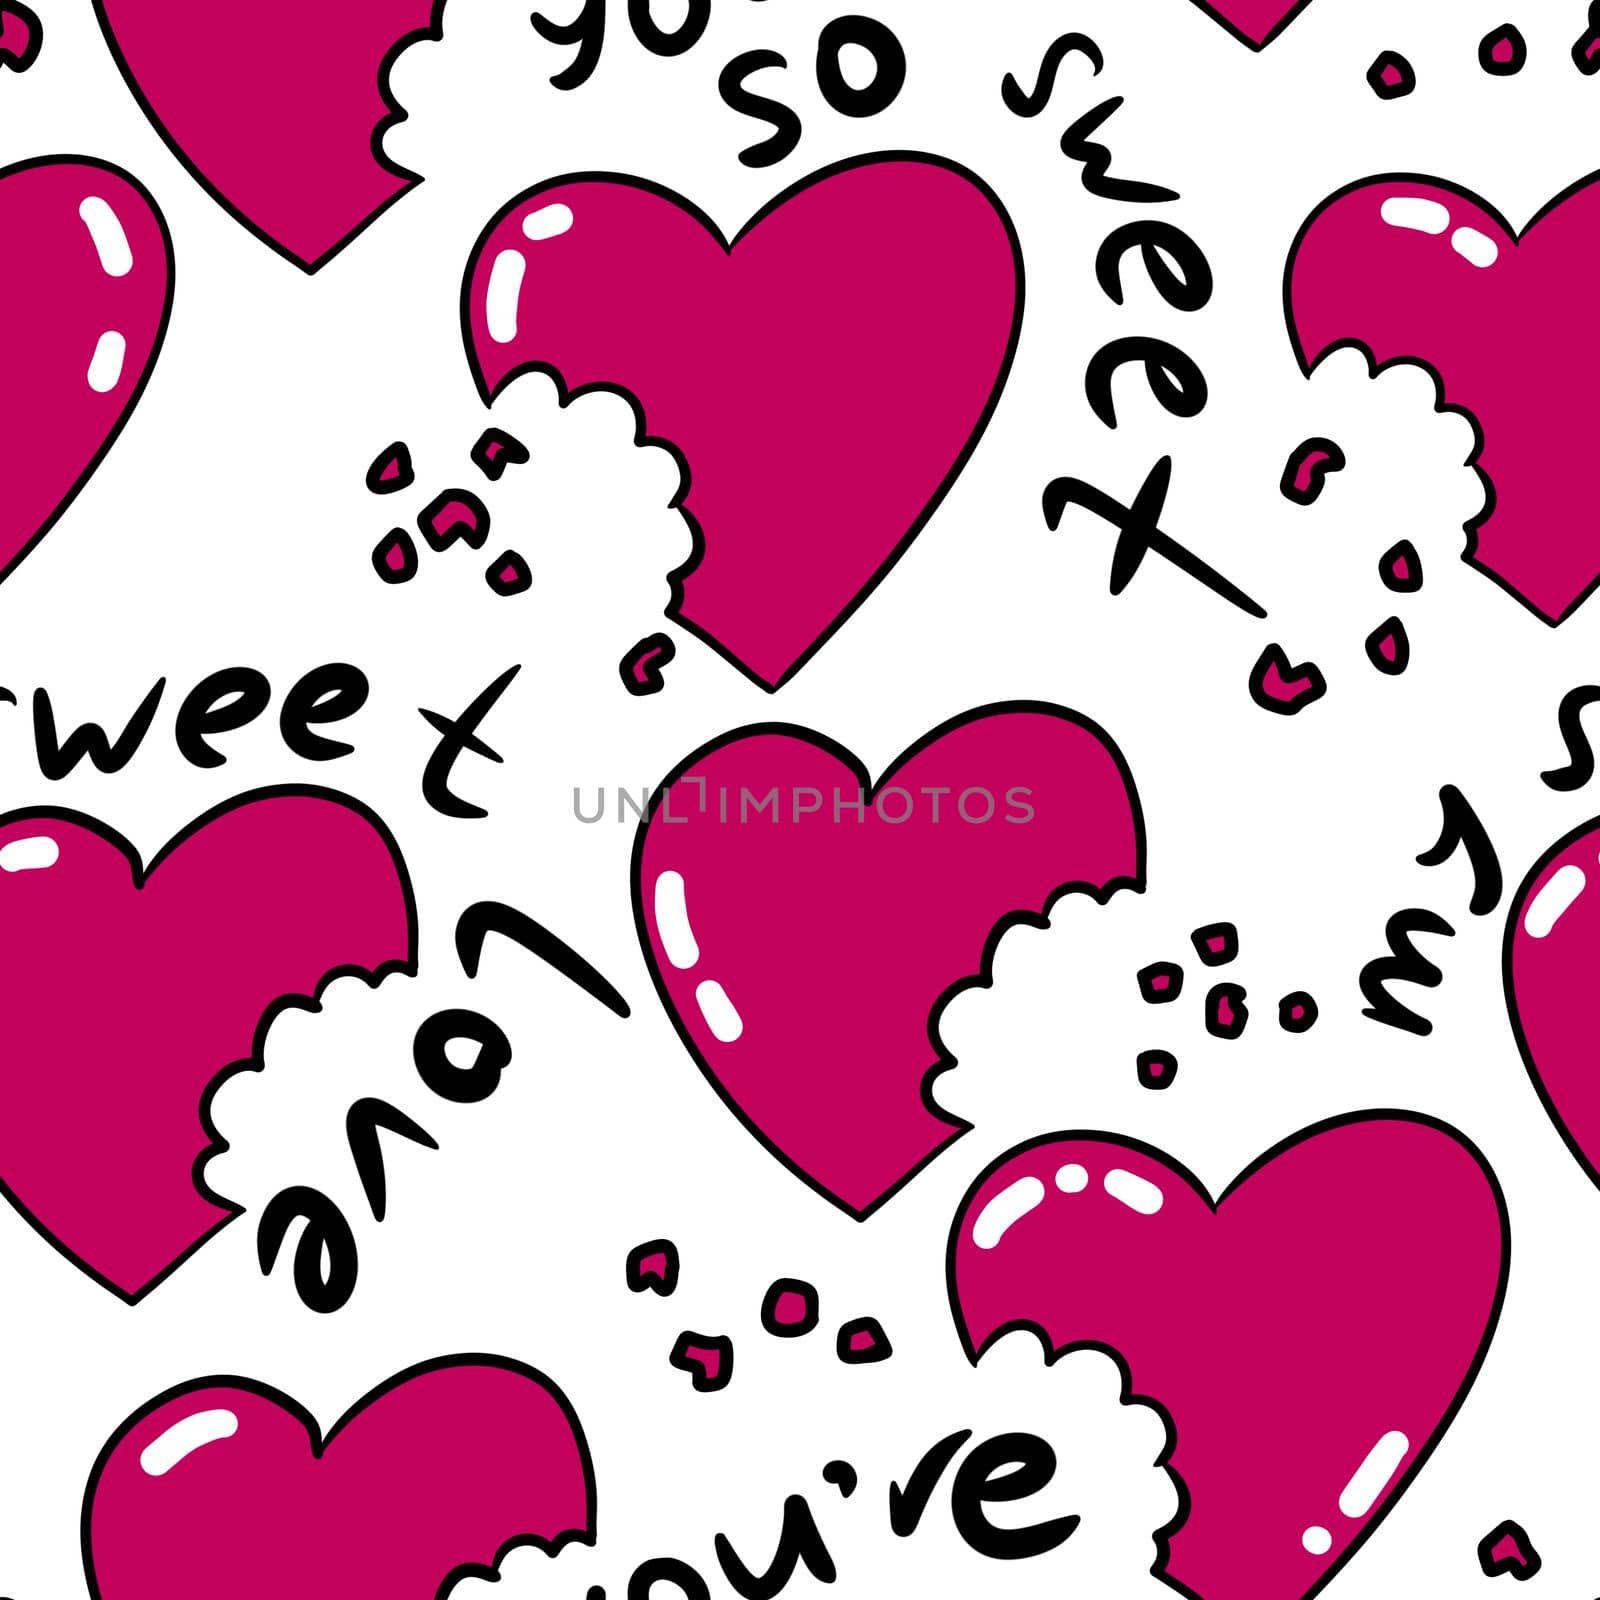 Handdrawn seamless pattern with red pink st valentine hearts bite with crumbles. Funny cute fabric print on white background, love humor print for textile wrapping paper, eating sweet passion pieces